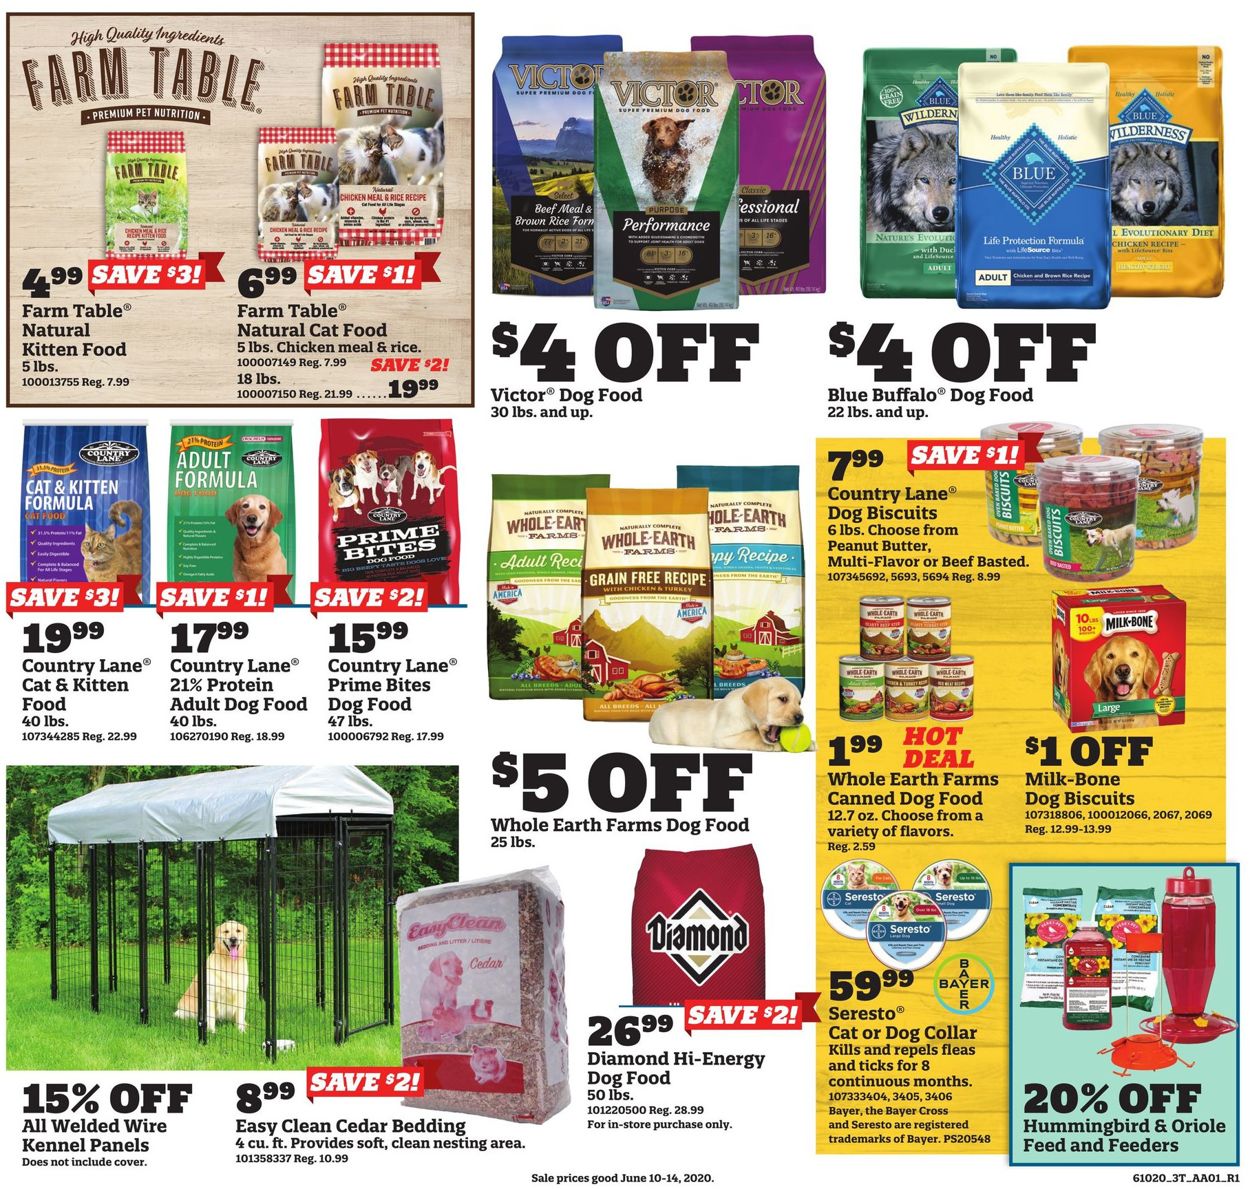 Orscheln Farm and Home Ad from 06/10/2020